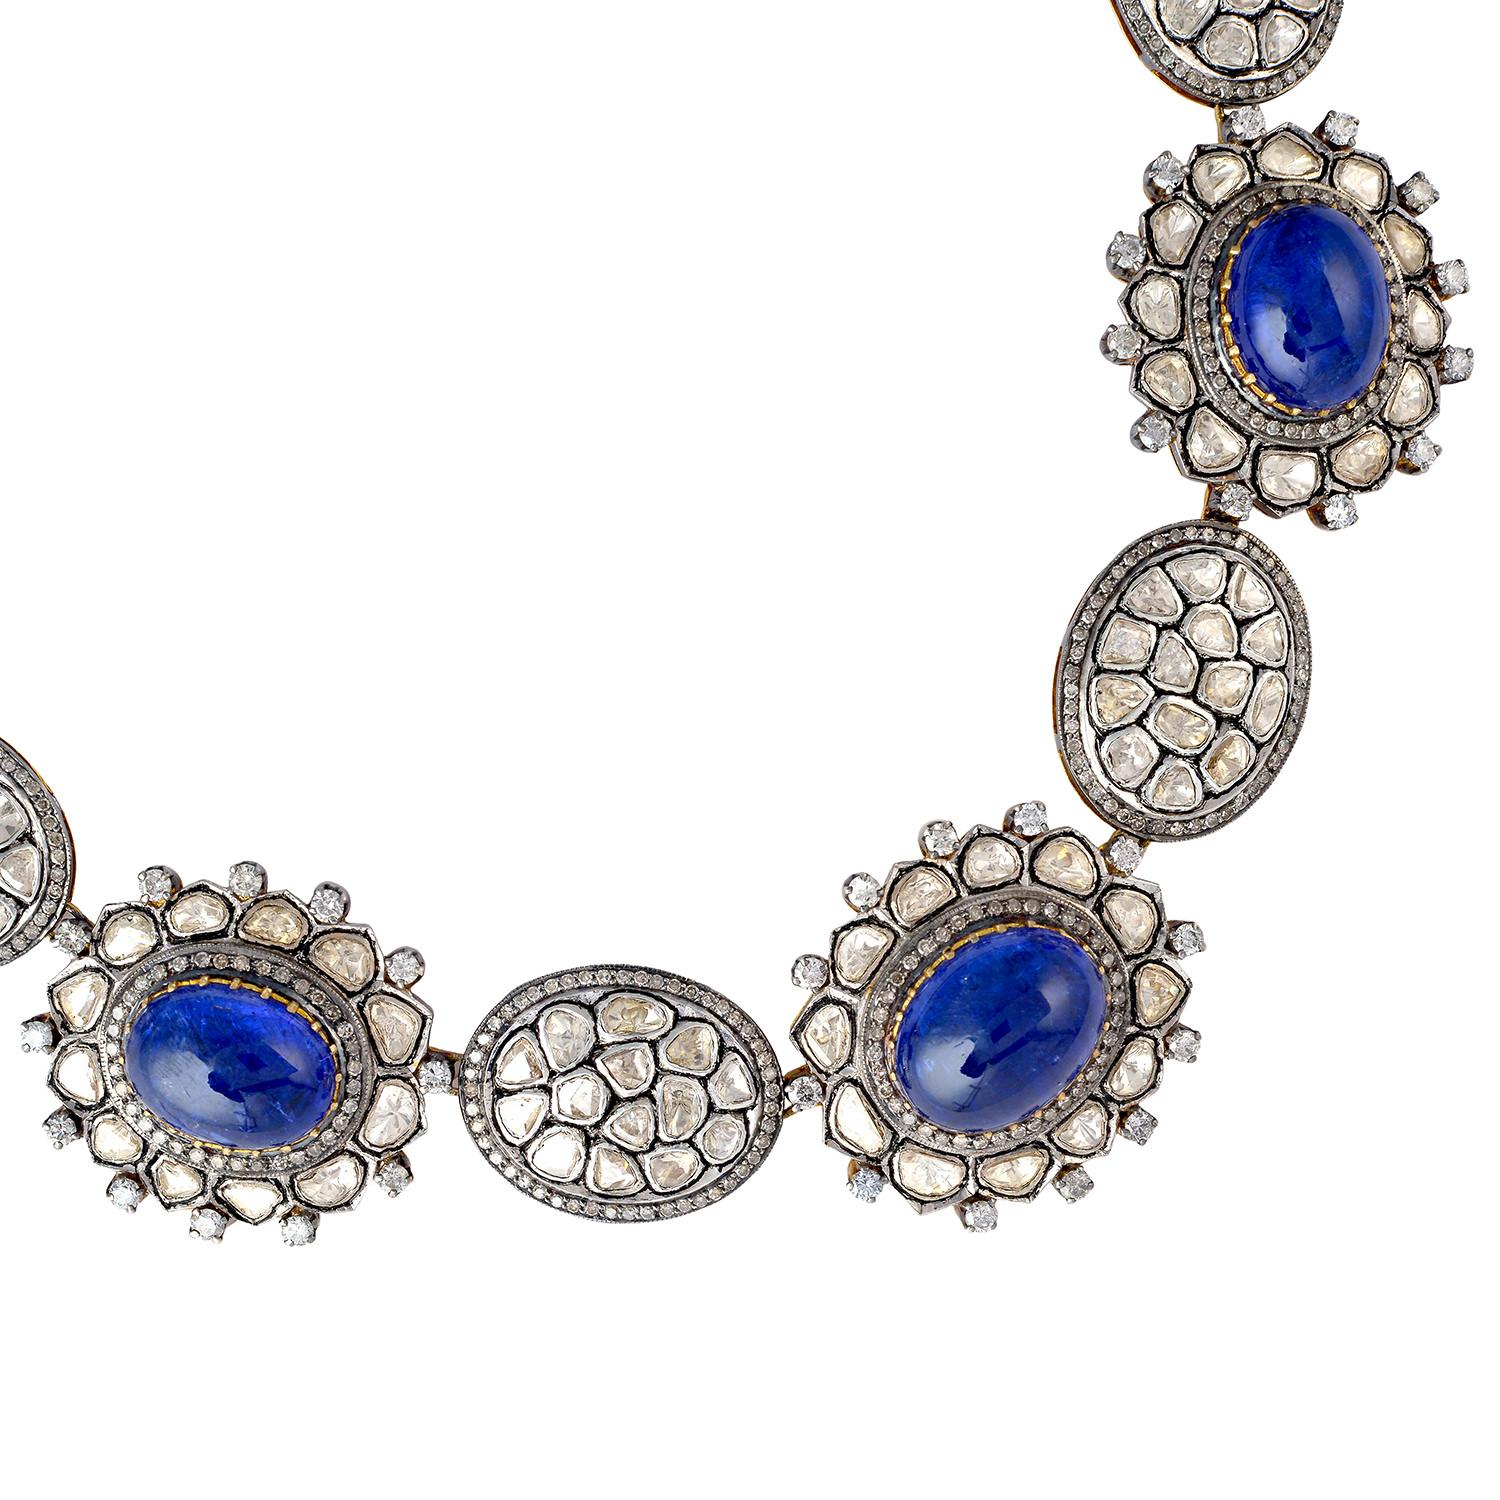 The Maharaja collection inspired by the Moghul Era & Indian heritage. A stunning necklace handmade in 14K gold and sterling silver. It is set in 80.1 carats tanzanite & encrusted with 18.91 carats of rose cut diamonds. Lobster clasp